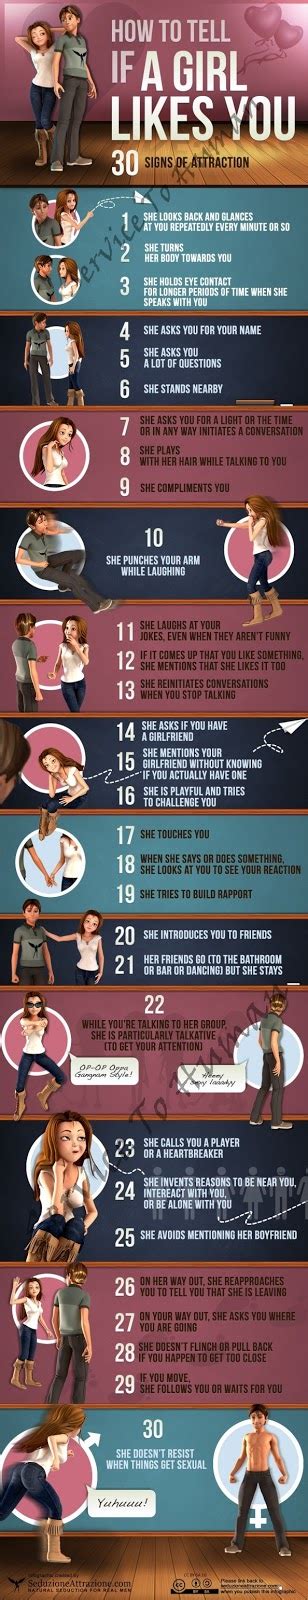 Service To Human How To Know If A Girl Likes You 30 Signs Of